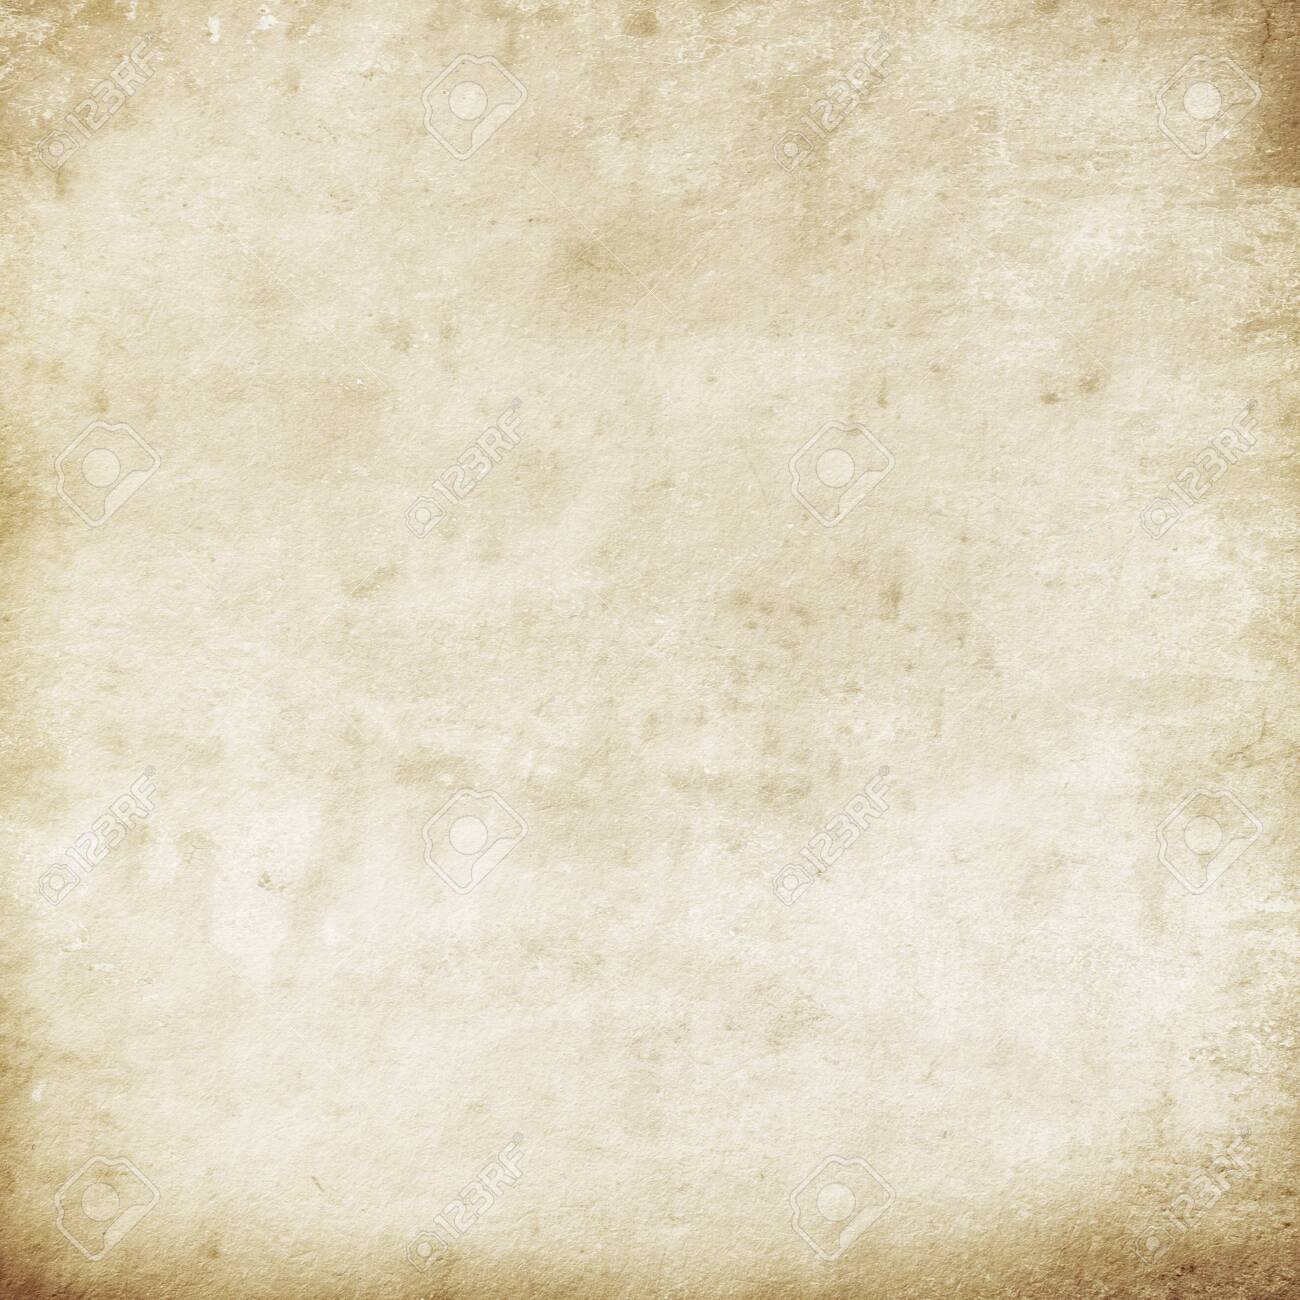 Abstract Aged Antique Background Stock Photo Picture And